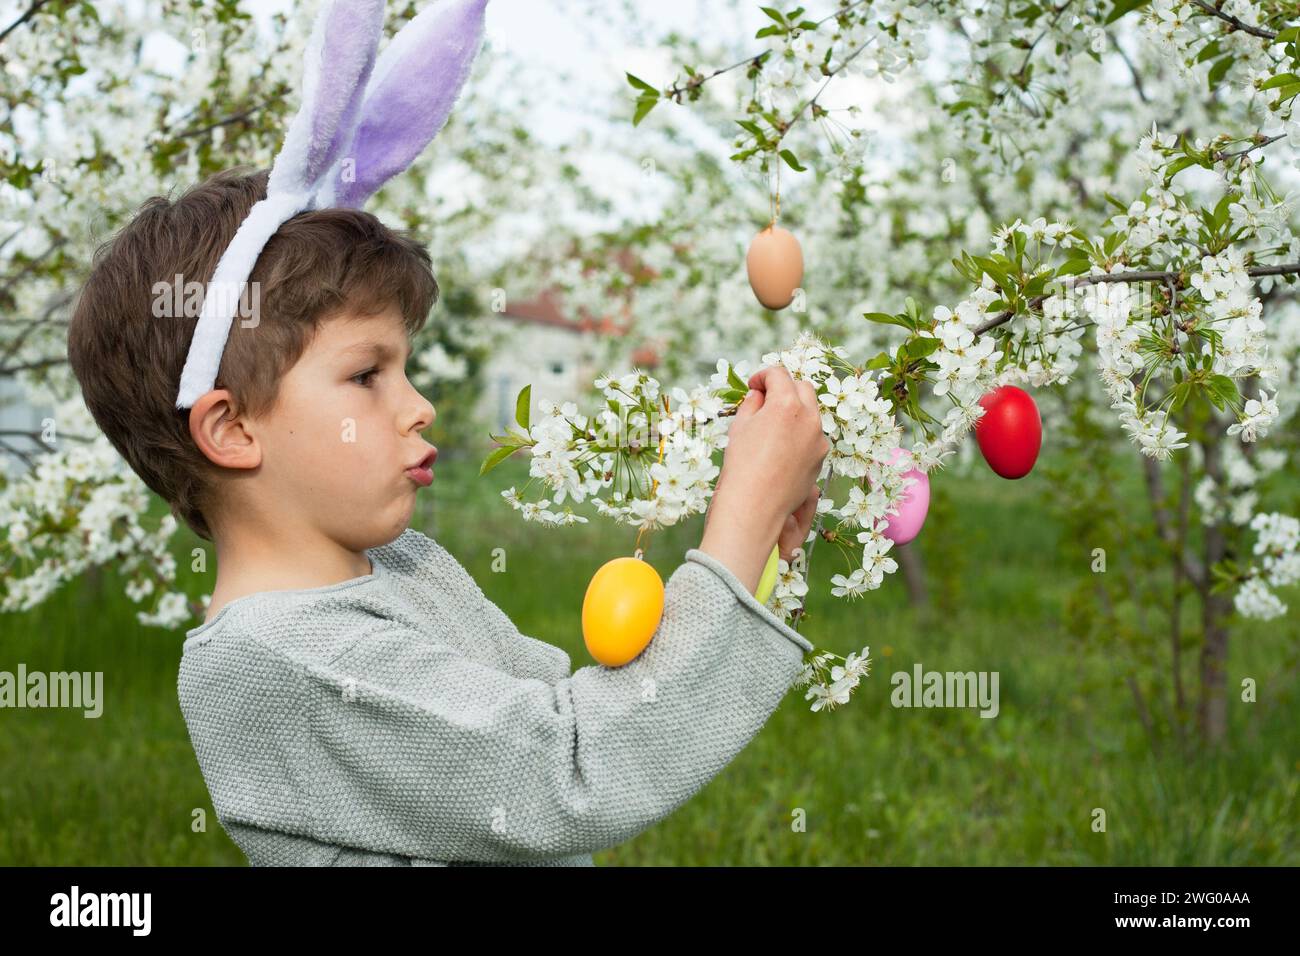 Easter egg hunt. preschool boy wearing bunny ears finding colorful eggs on Easter egg hunt in garden. child decorating branches of flowering tree with Stock Photo